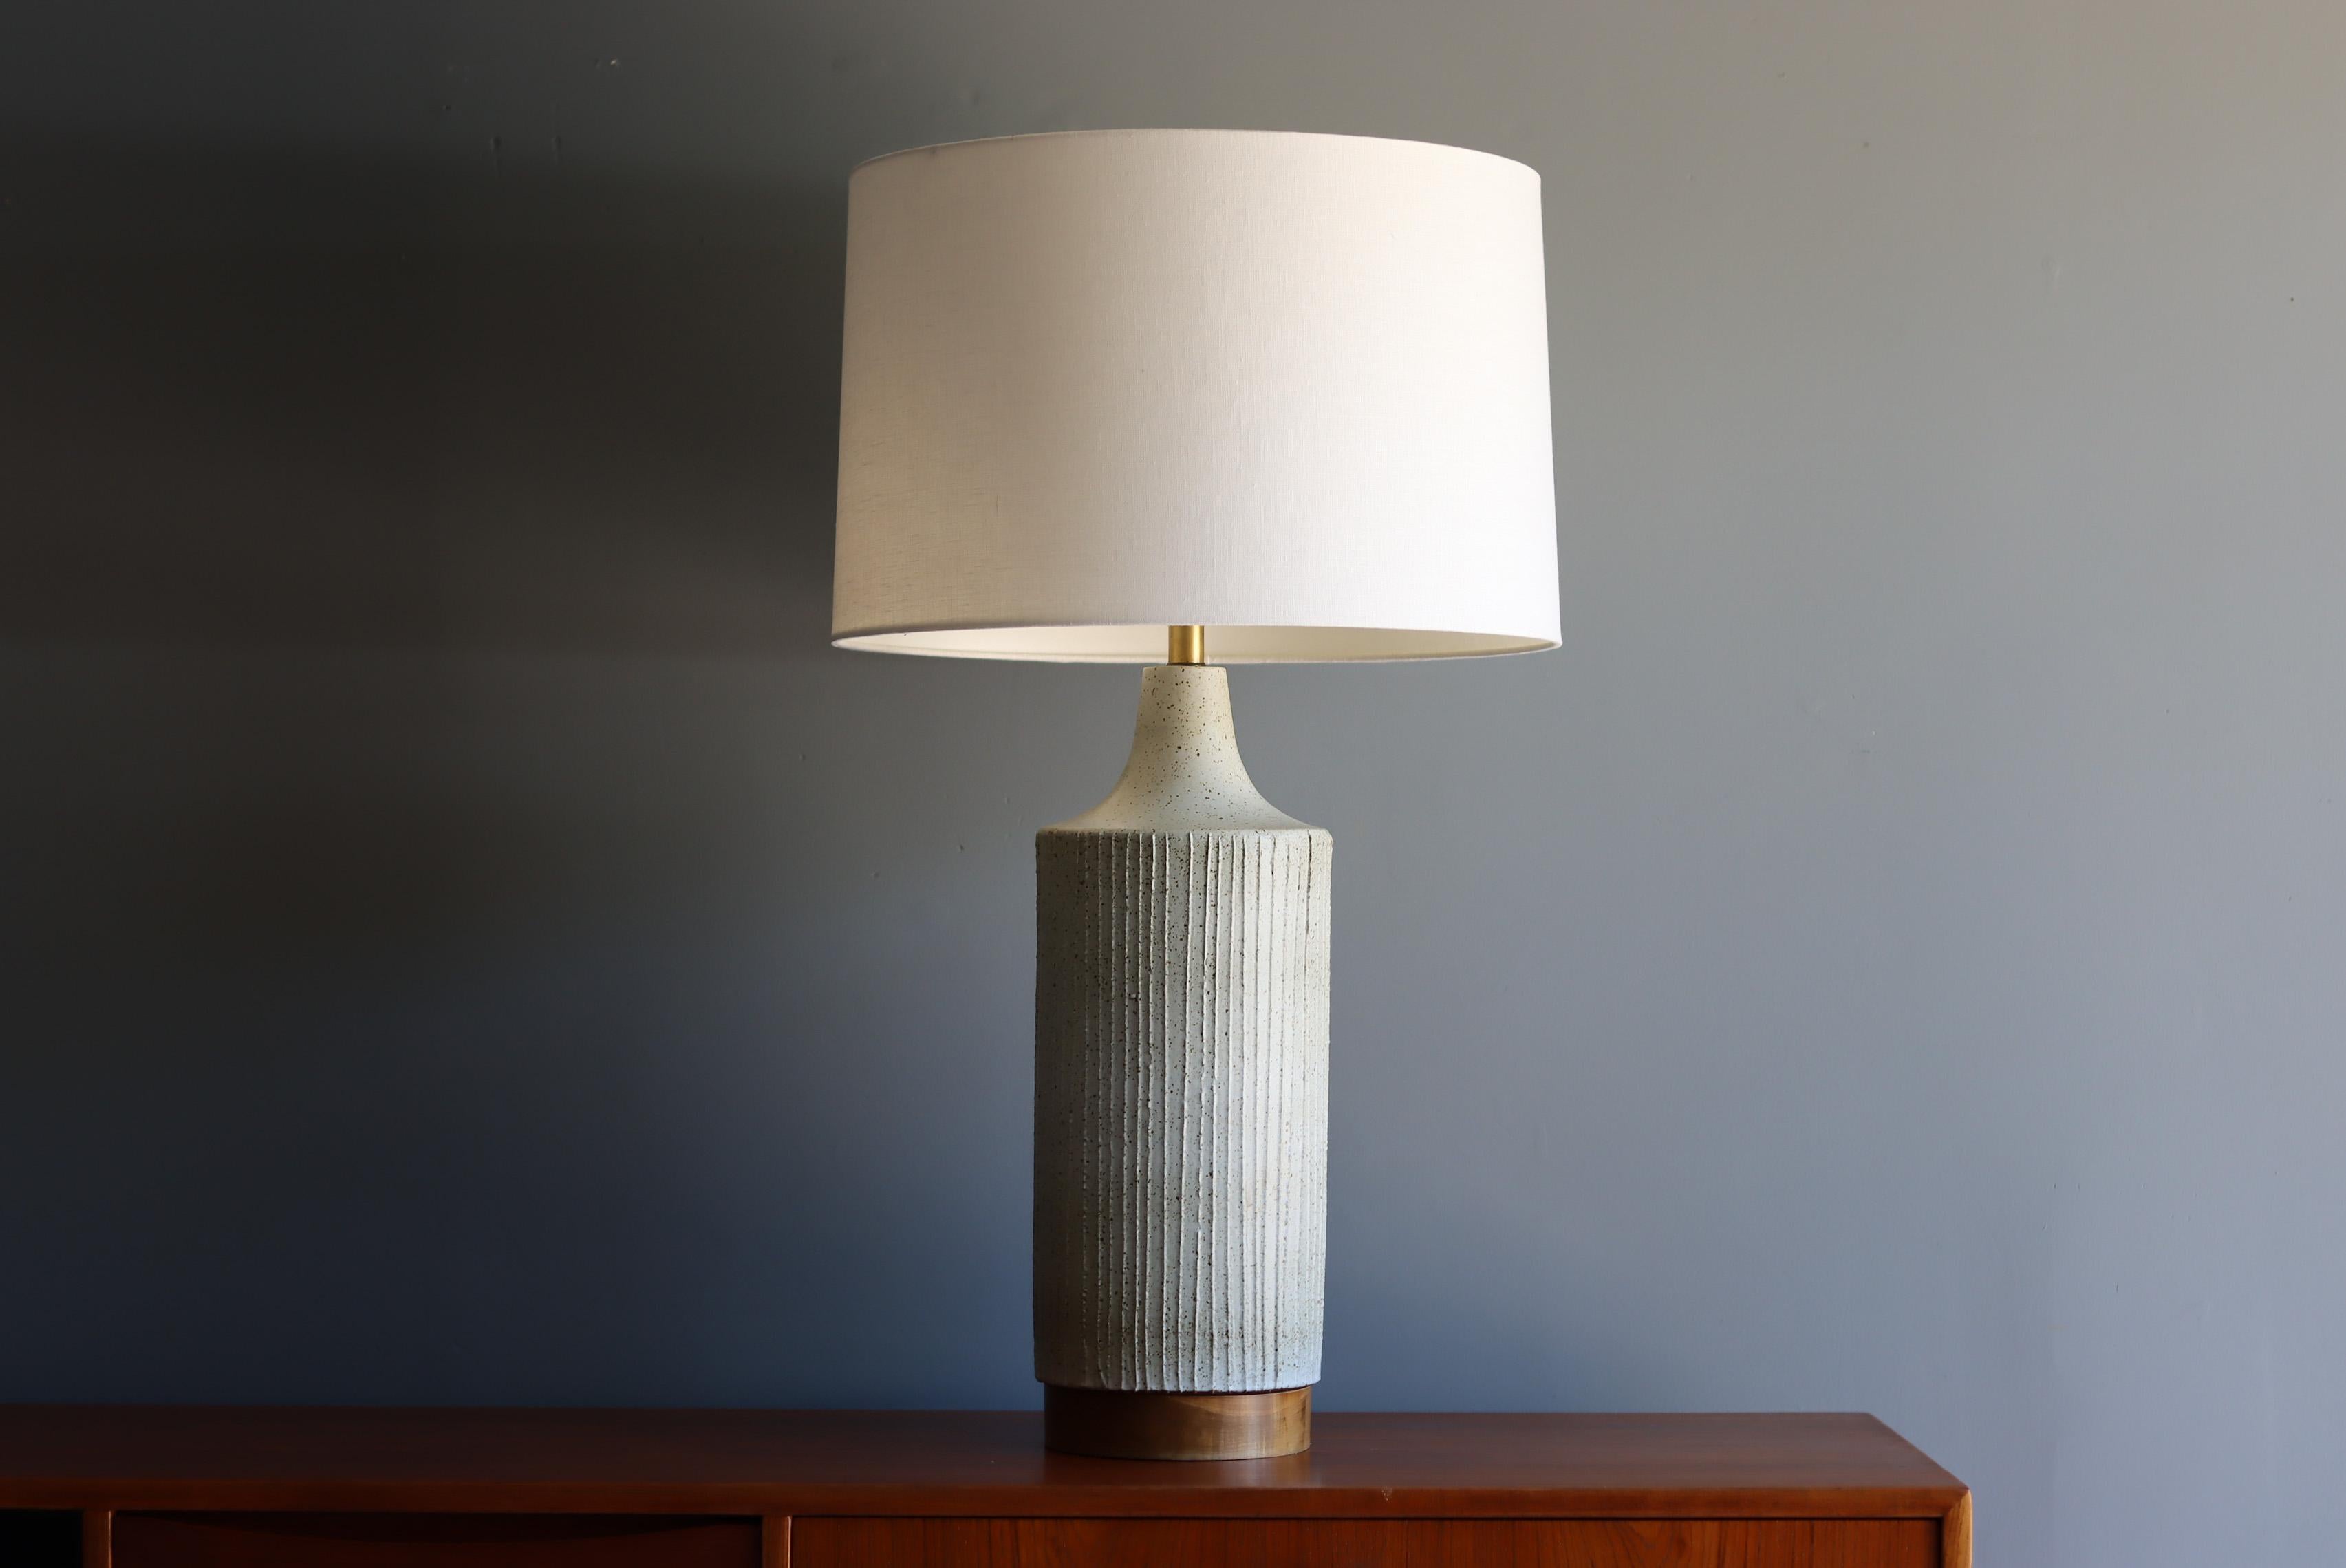 Large scale table lamp by renowned California potter, David Cressey. Produced by Architectural Pottery Pro/Artisan collection. 

This example features a beautiful white glaze with brown and black speckling. Vertical decoration throughout with